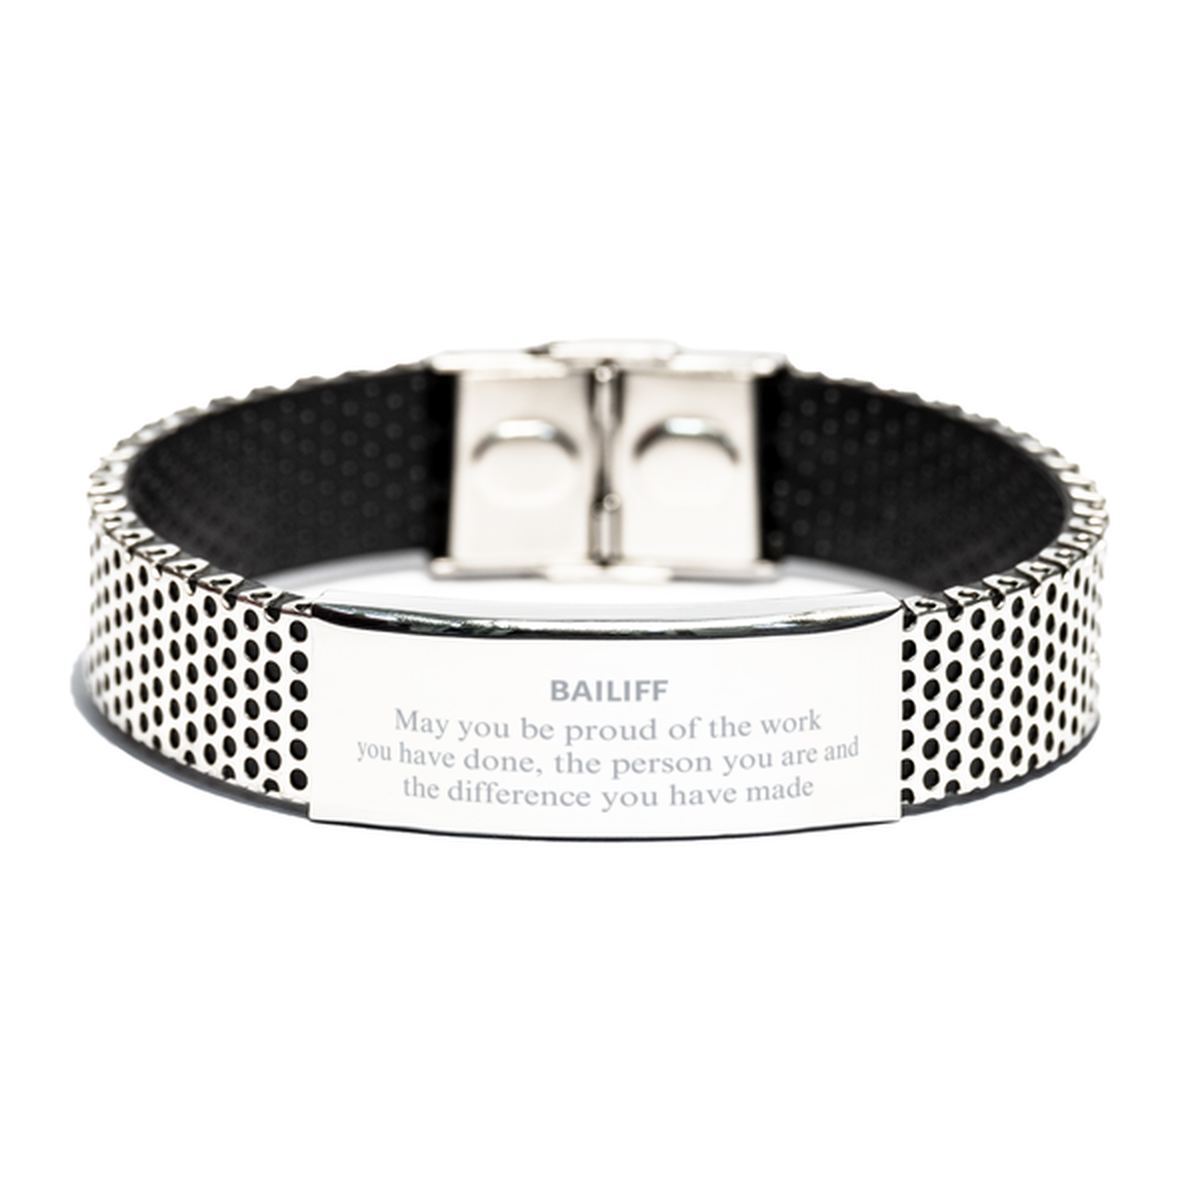 Bailiff May you be proud of the work you have done, Retirement Bailiff Stainless Steel Bracelet for Colleague Appreciation Gifts Amazing for Bailiff